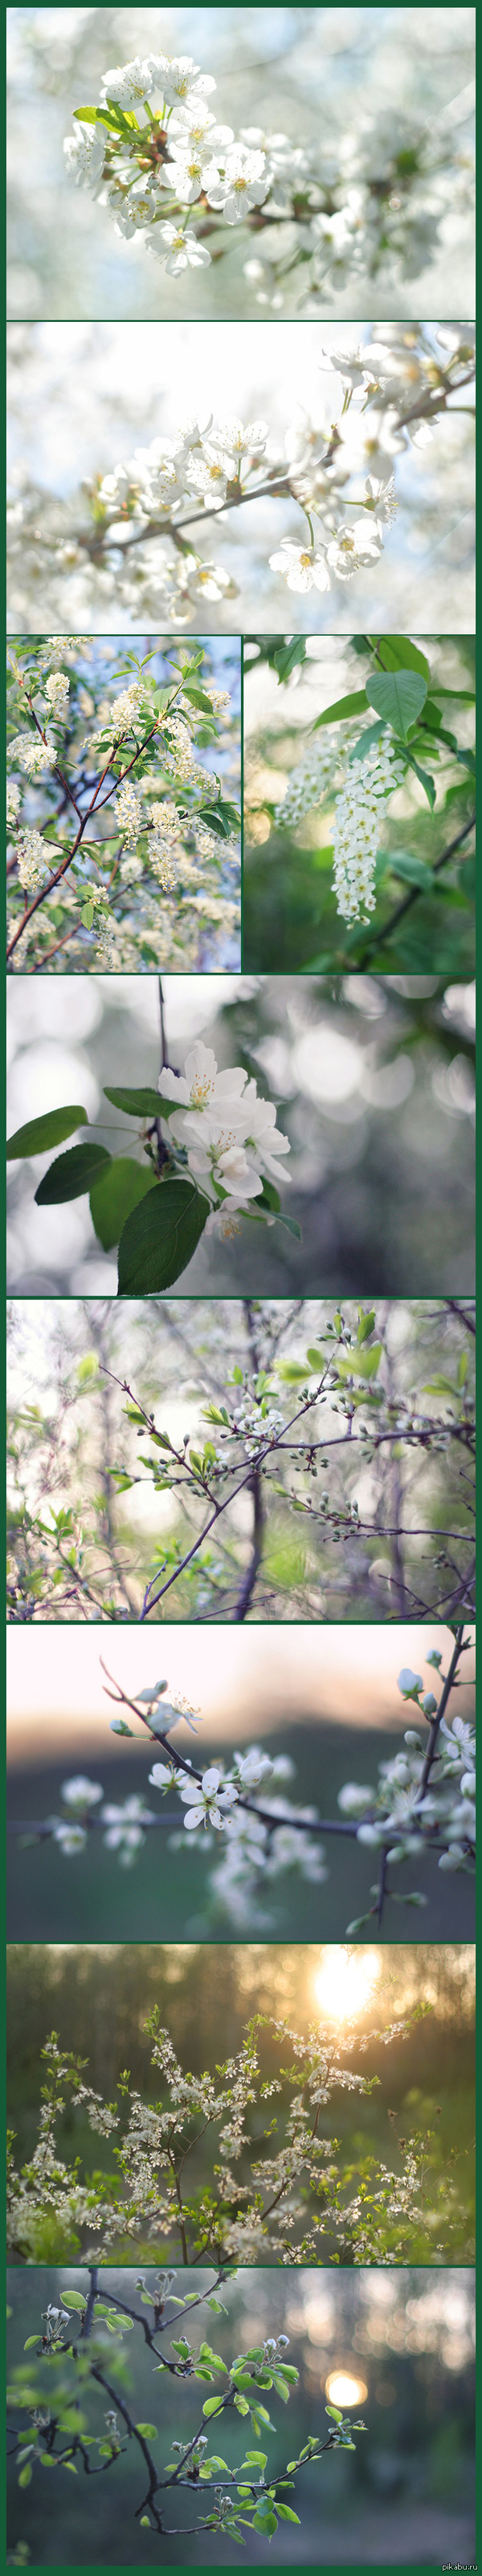 Spring everyone :) - My, Spring, Nature, The photo, League of photographers, Photographer, Longpost